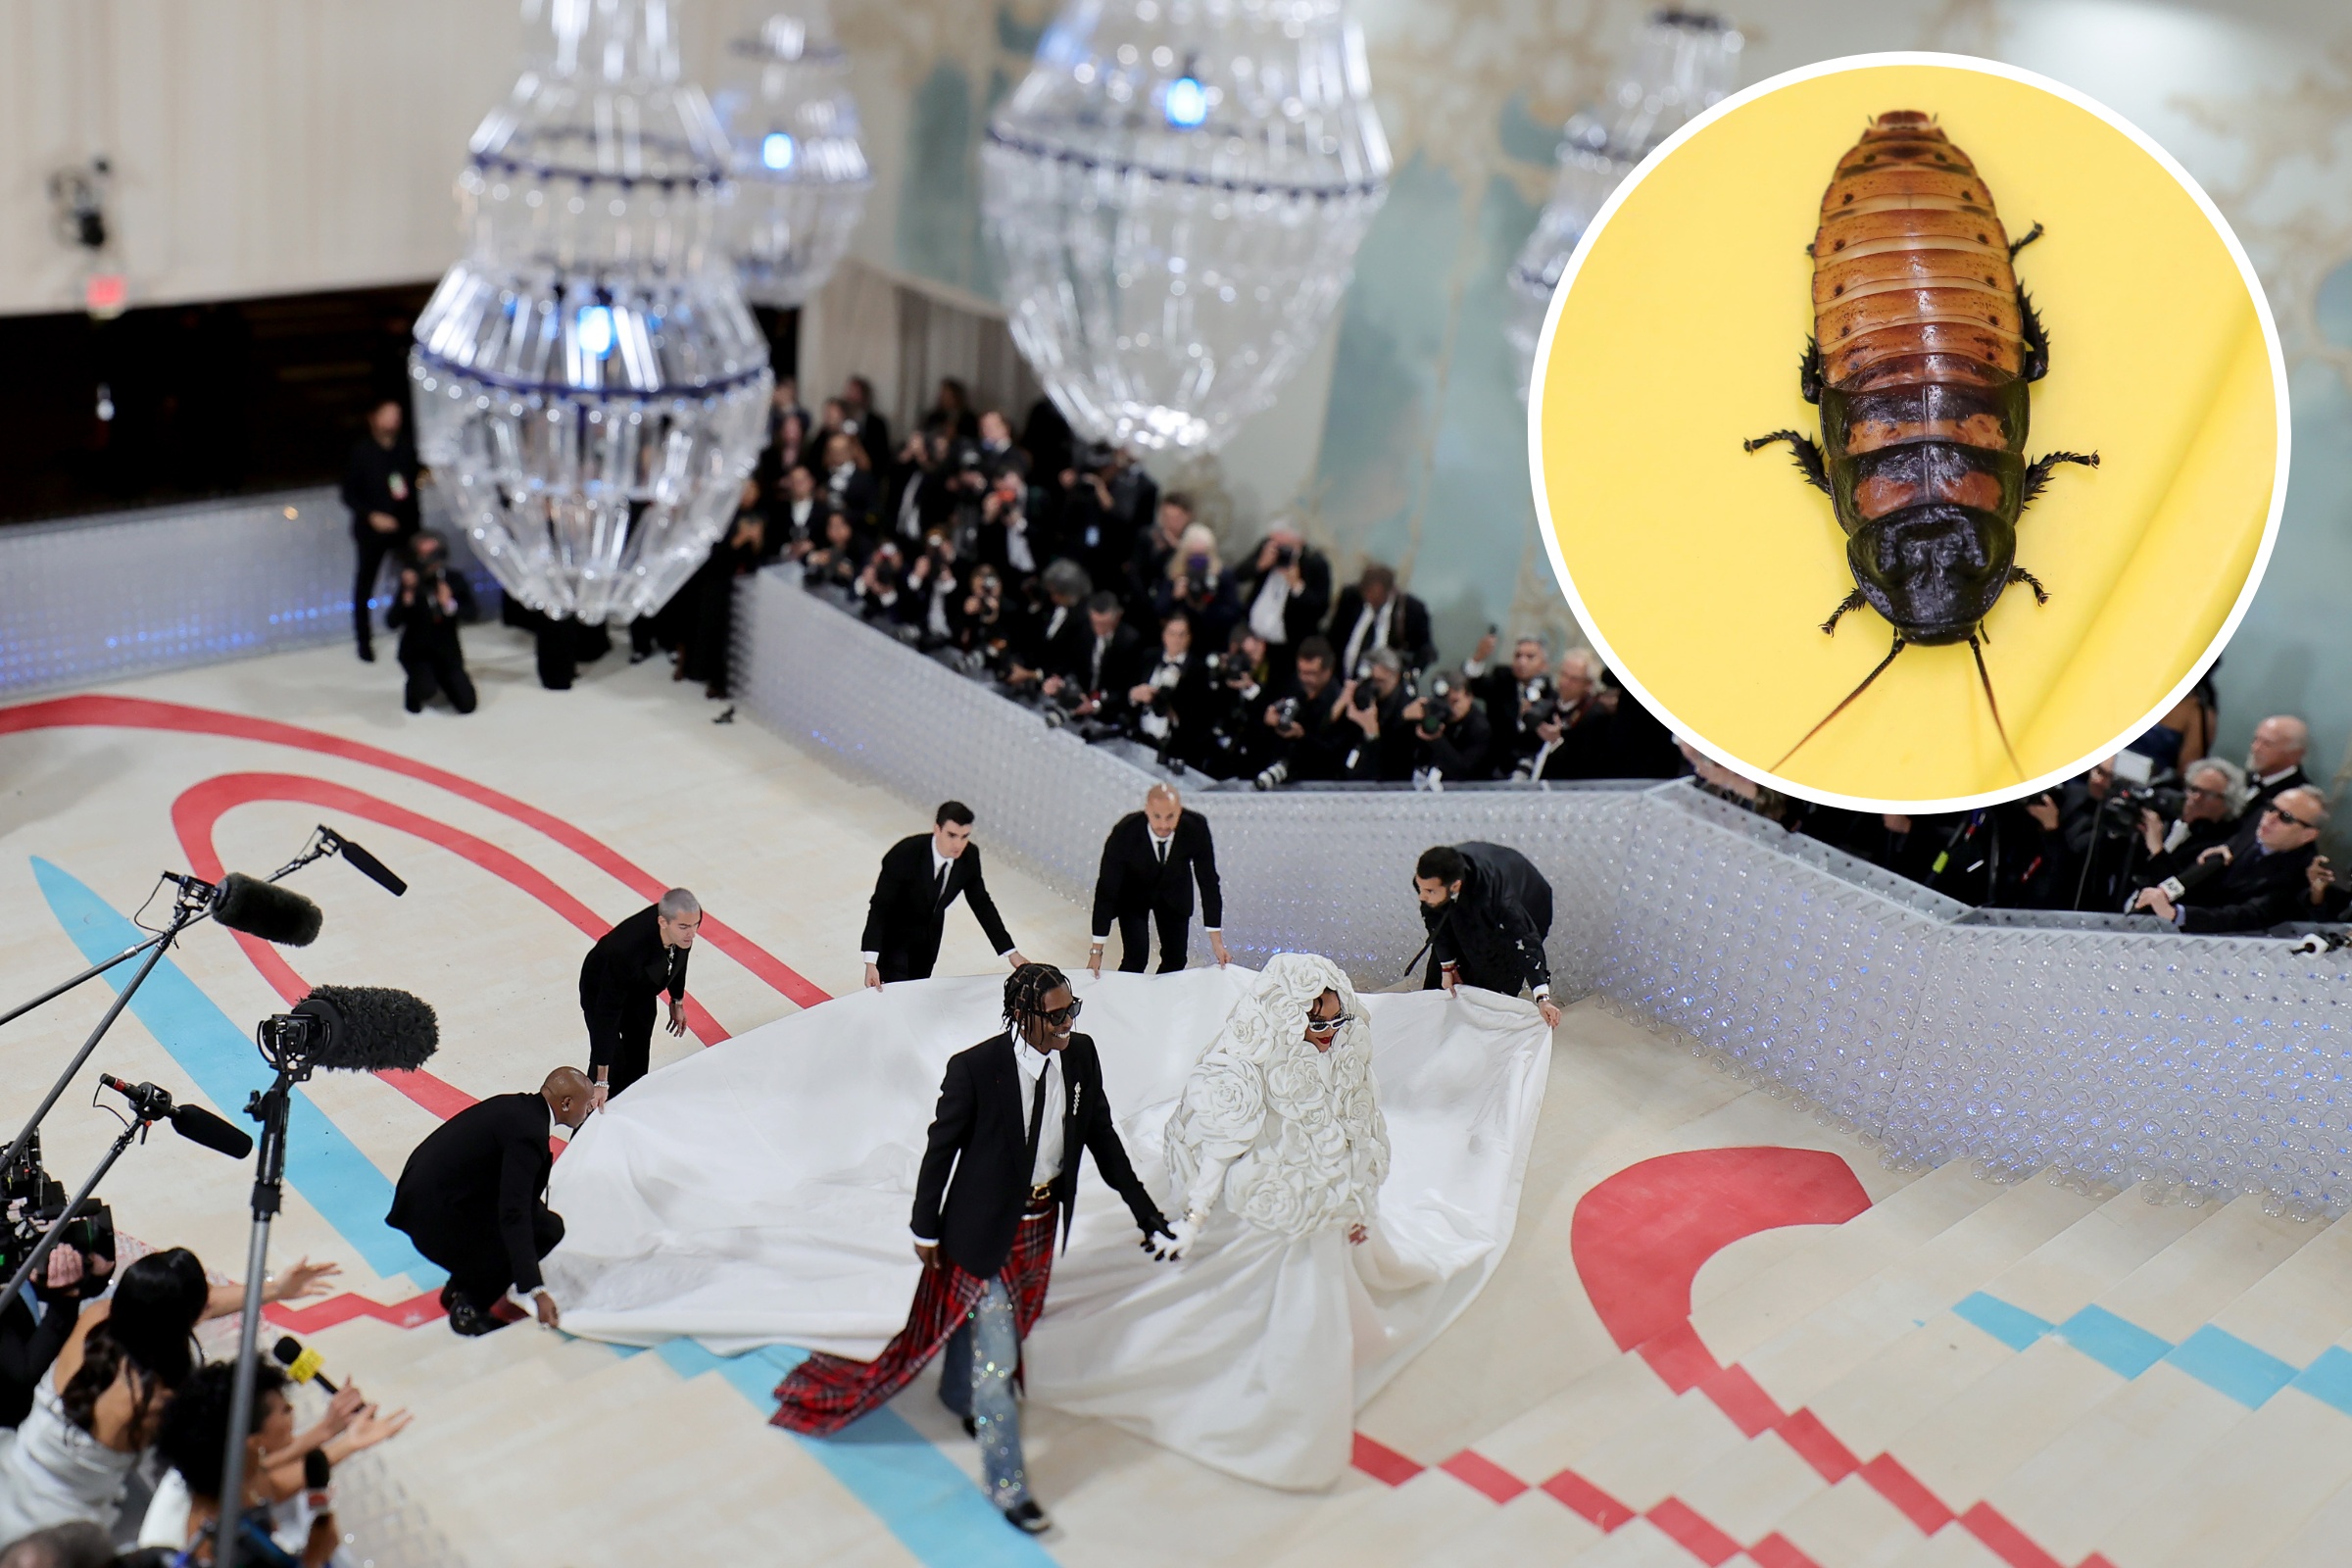 Video of Cockroach at Met Gala Goes Viral Before Getting Stepped On